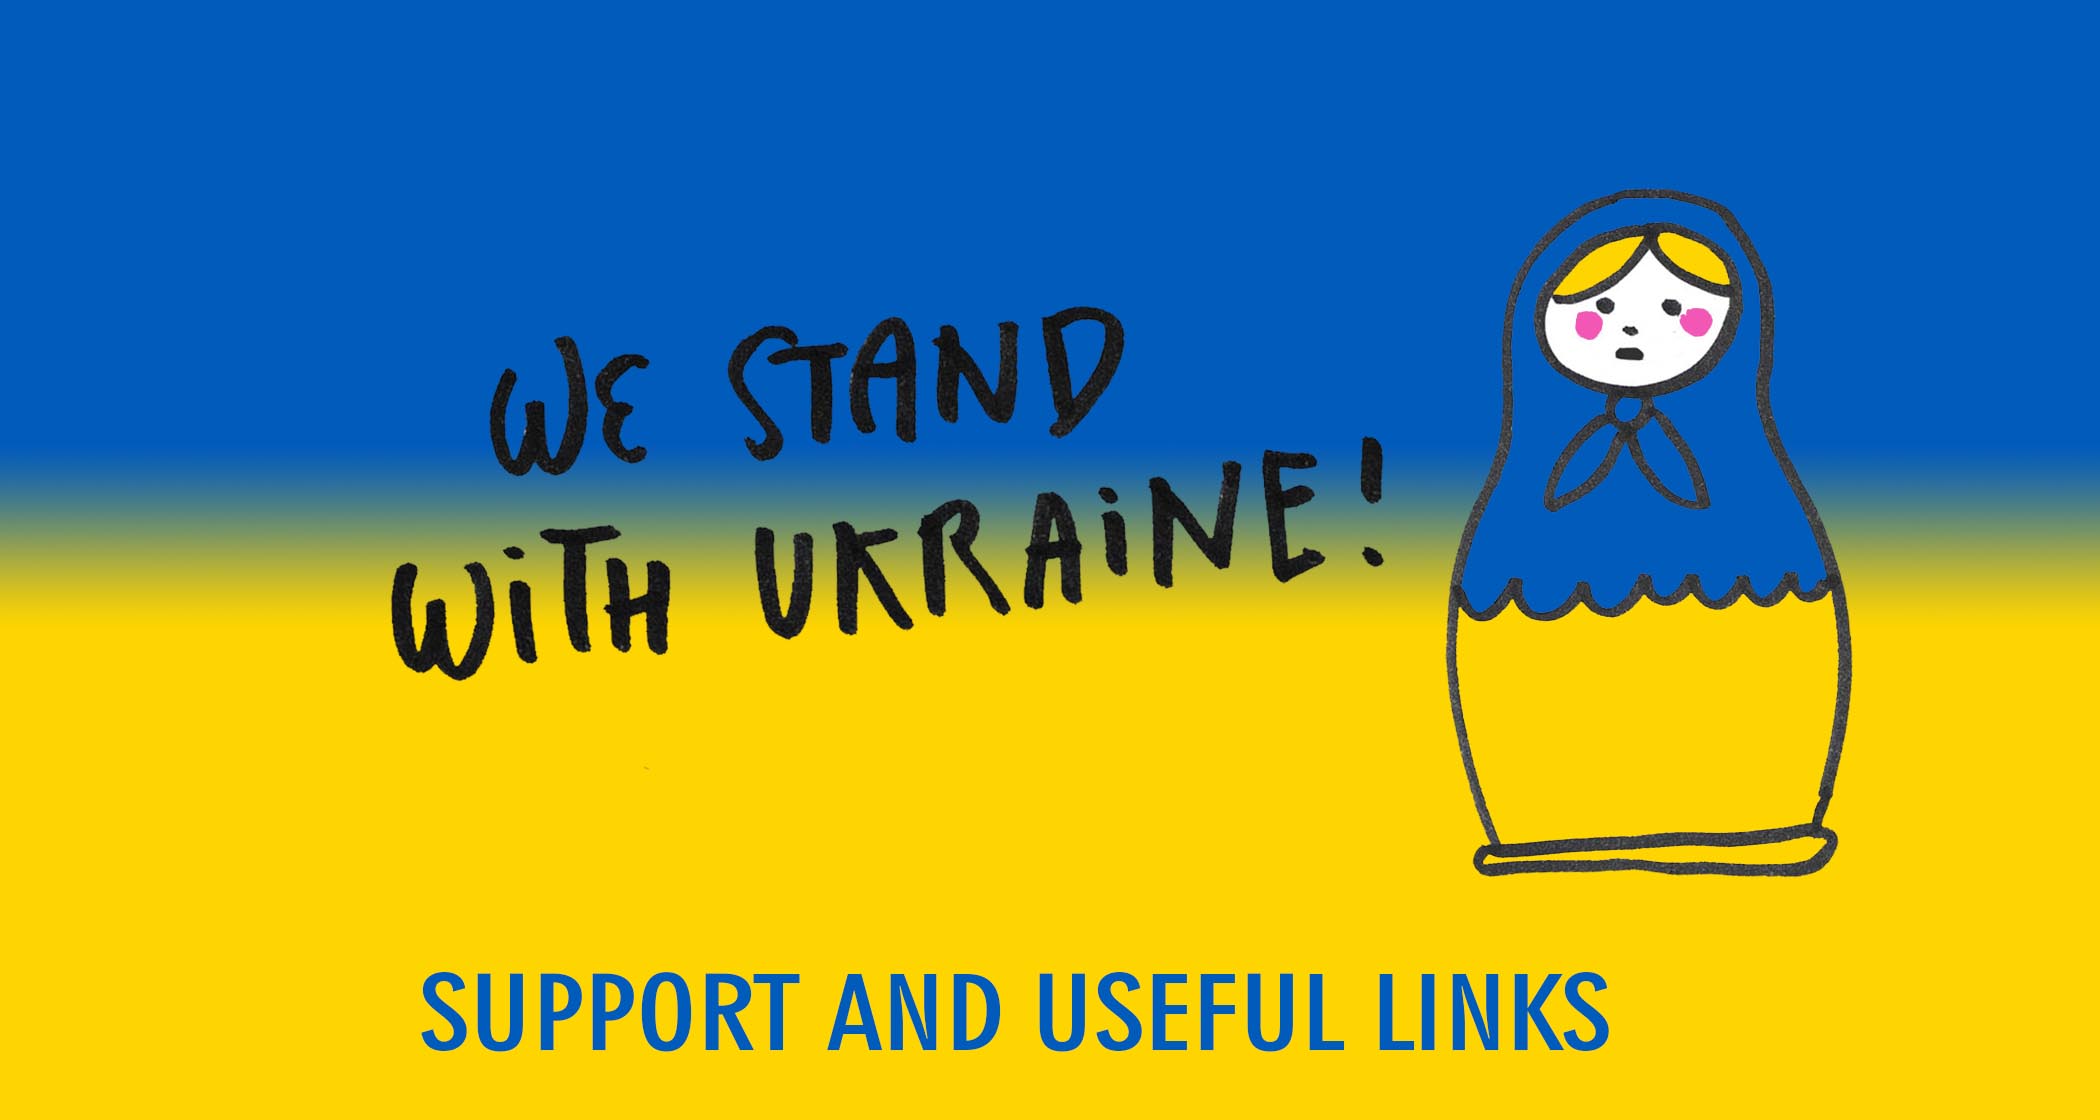 We stand with Ukraine / support and useful links